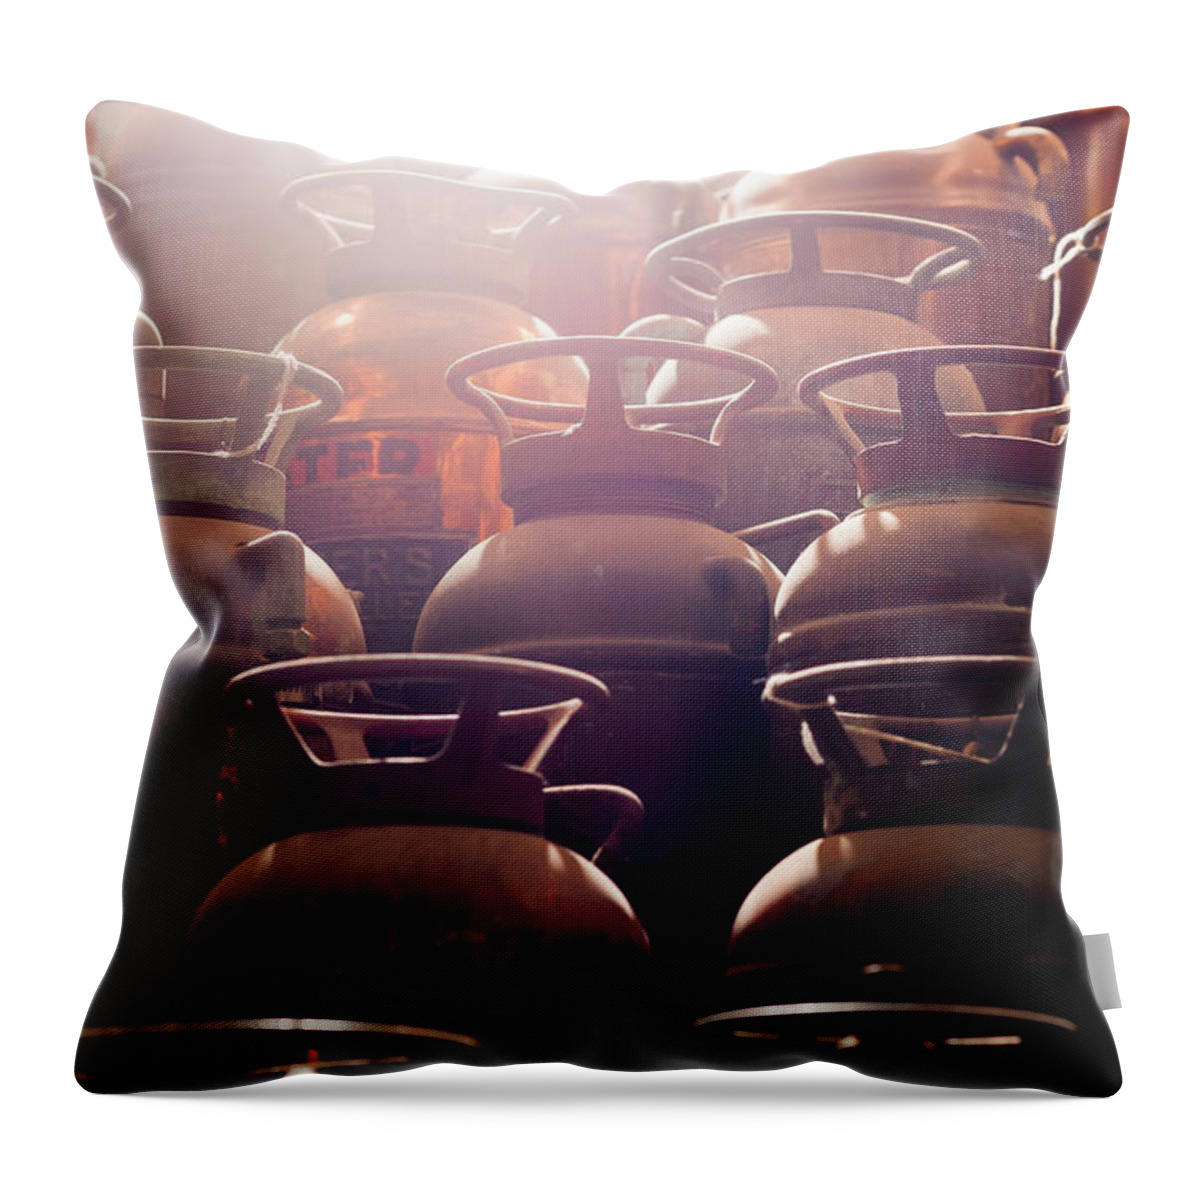 Steven Green Throw Pillow featuring the photograph Extinguish by SR Green